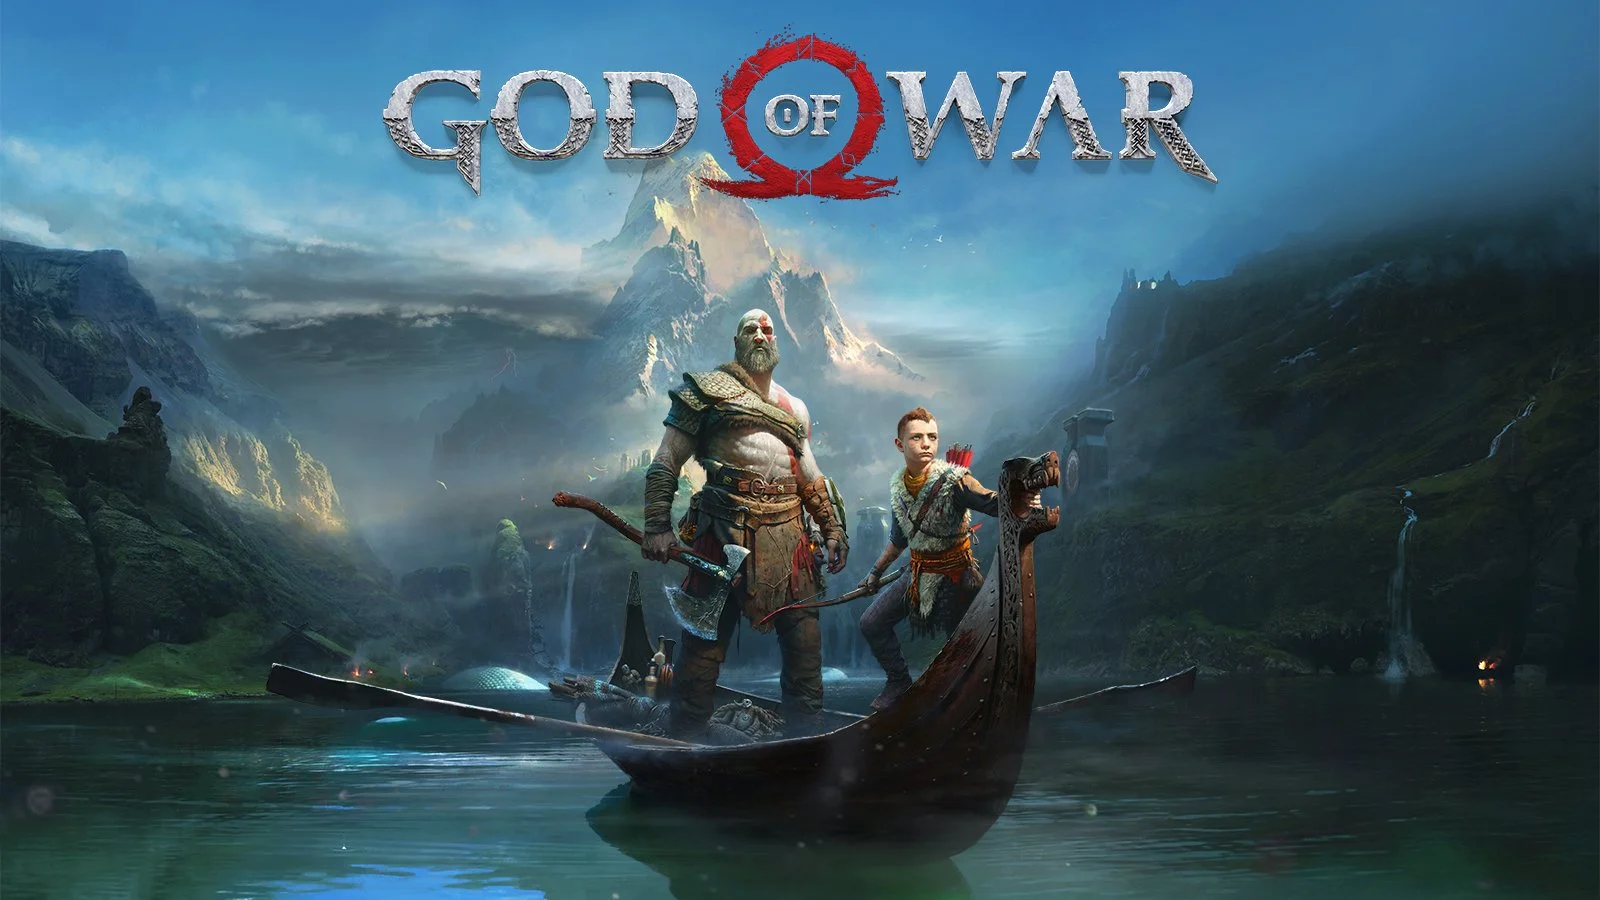 How God of War Ragnarok's Review Scores Compare to the 2018 Game